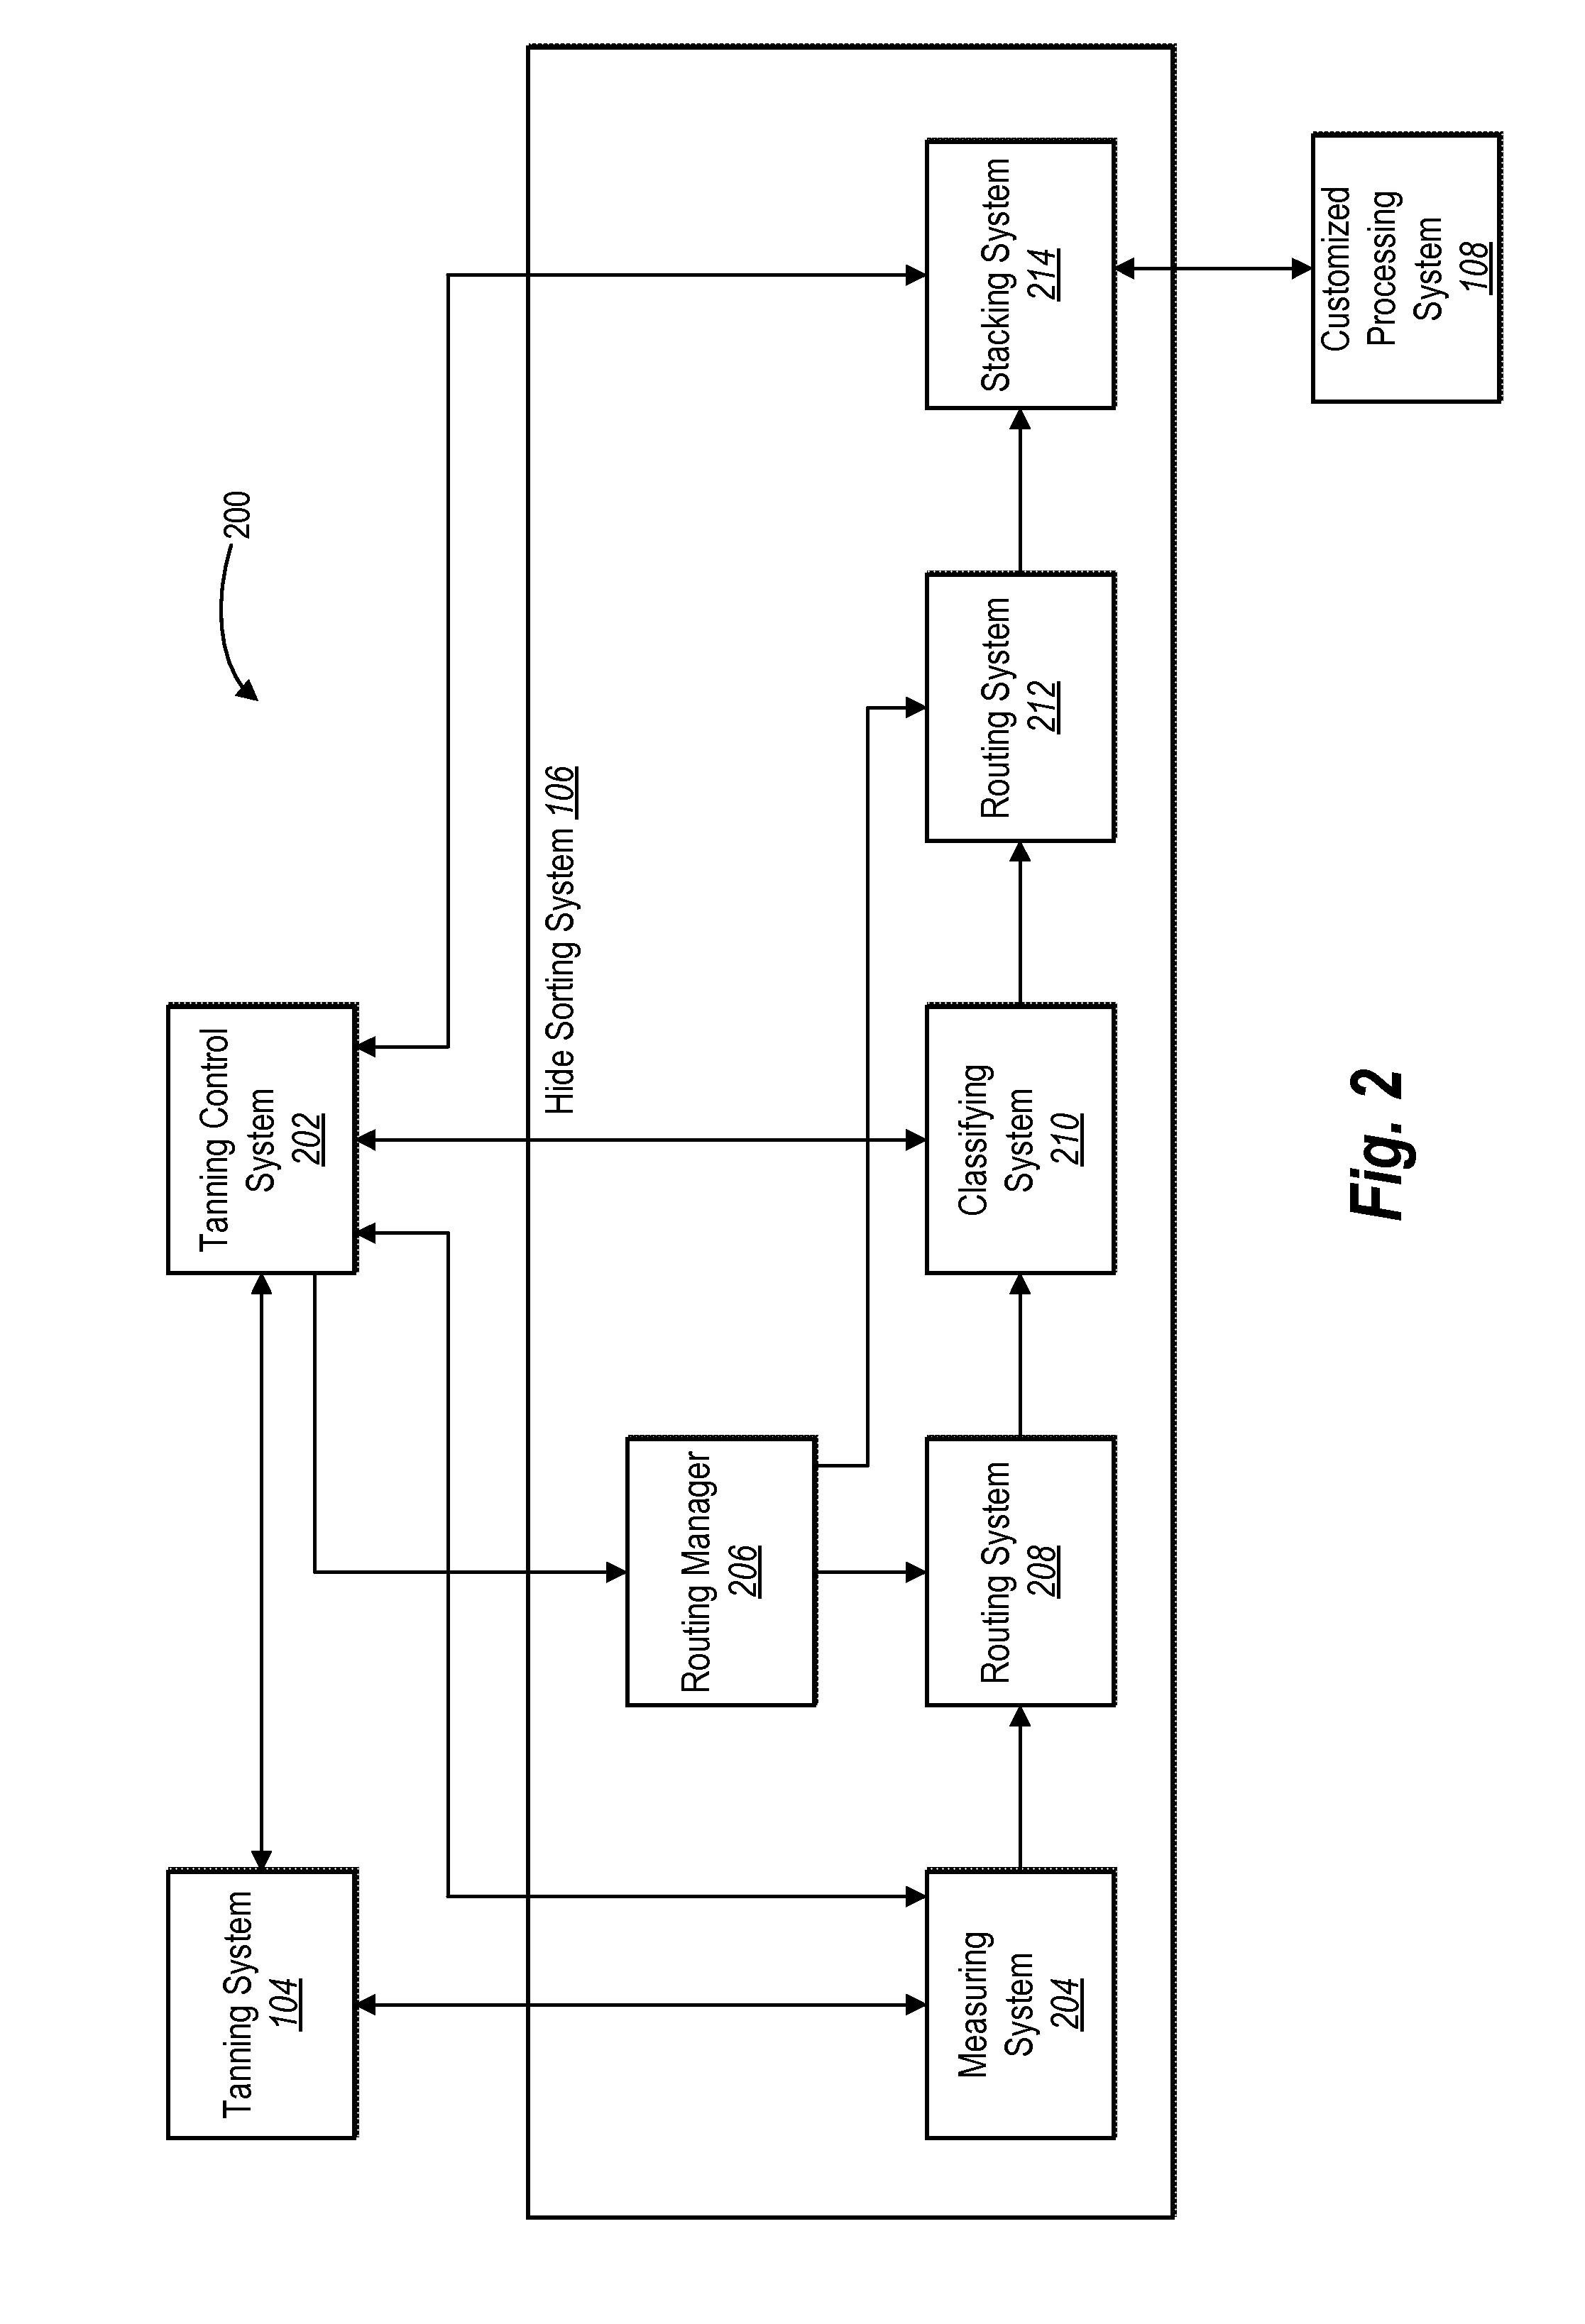 Hide sorting systems and methods